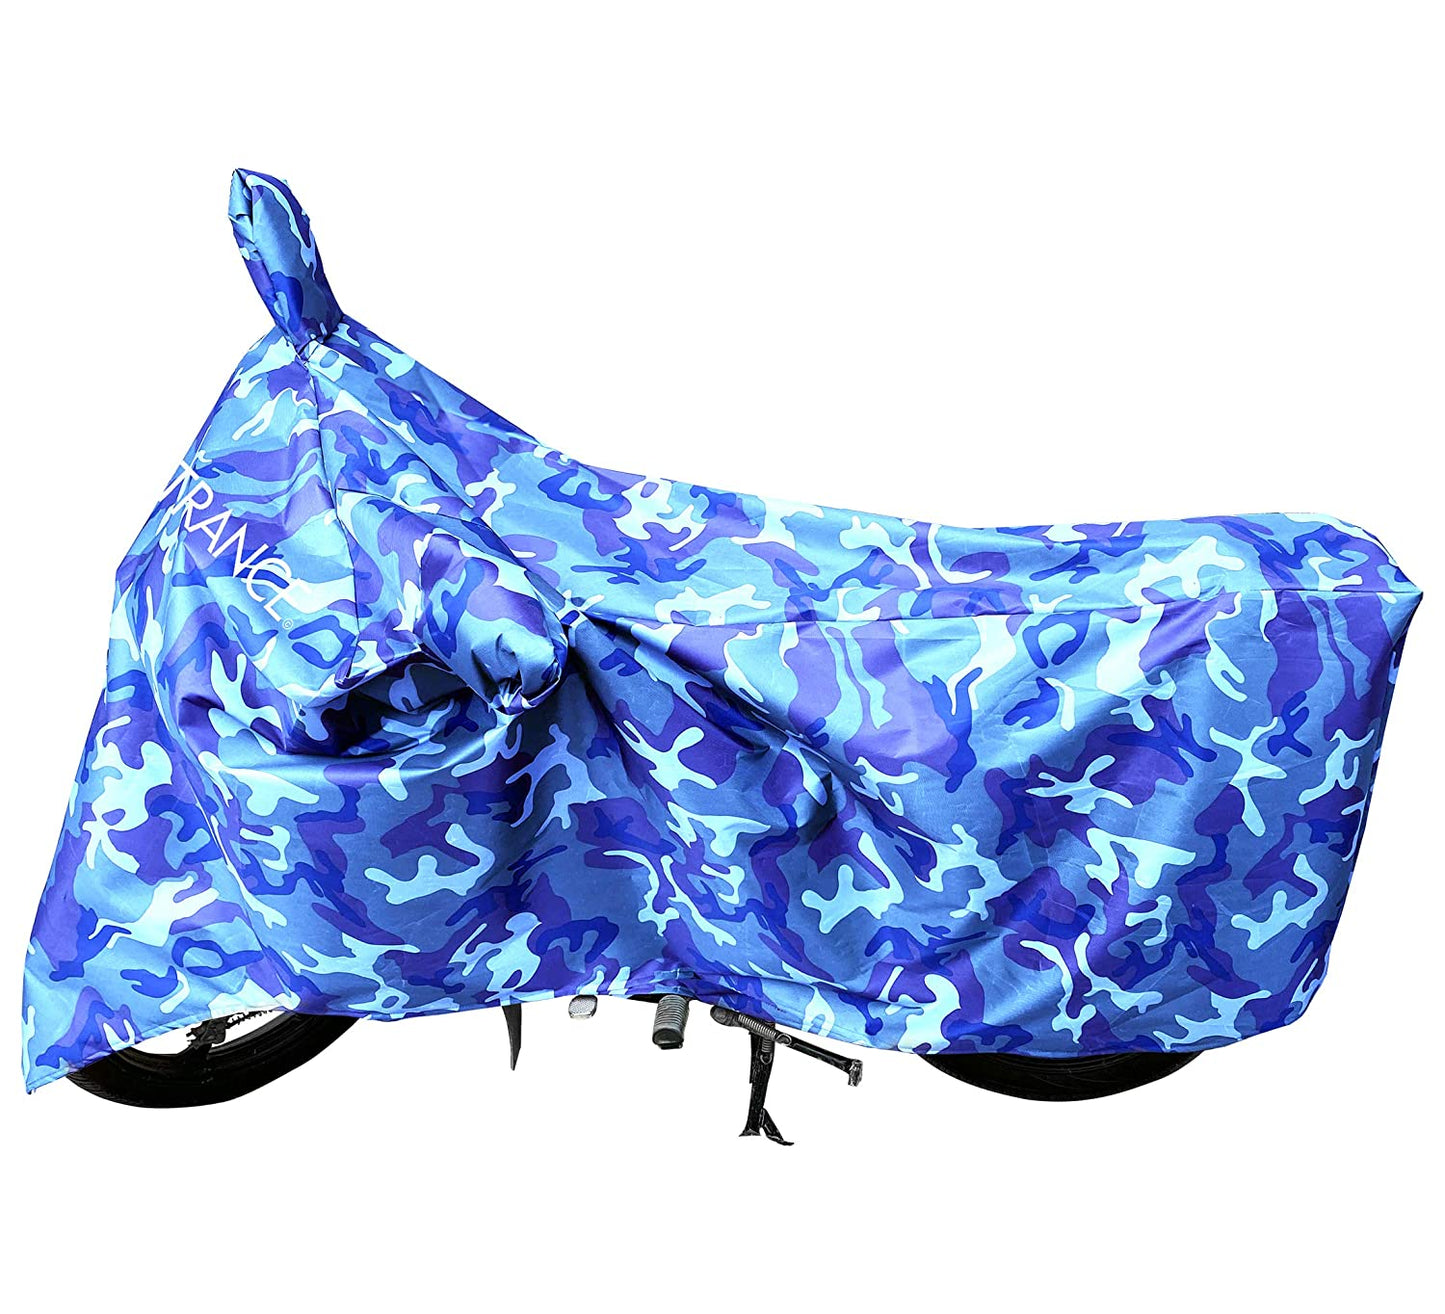 MotoTrance Jungle Bike Body Covers For Honda Gold Wing GL1800 - Interlock-Stitched Waterproof and Heat Resistant with Mirror Pockets